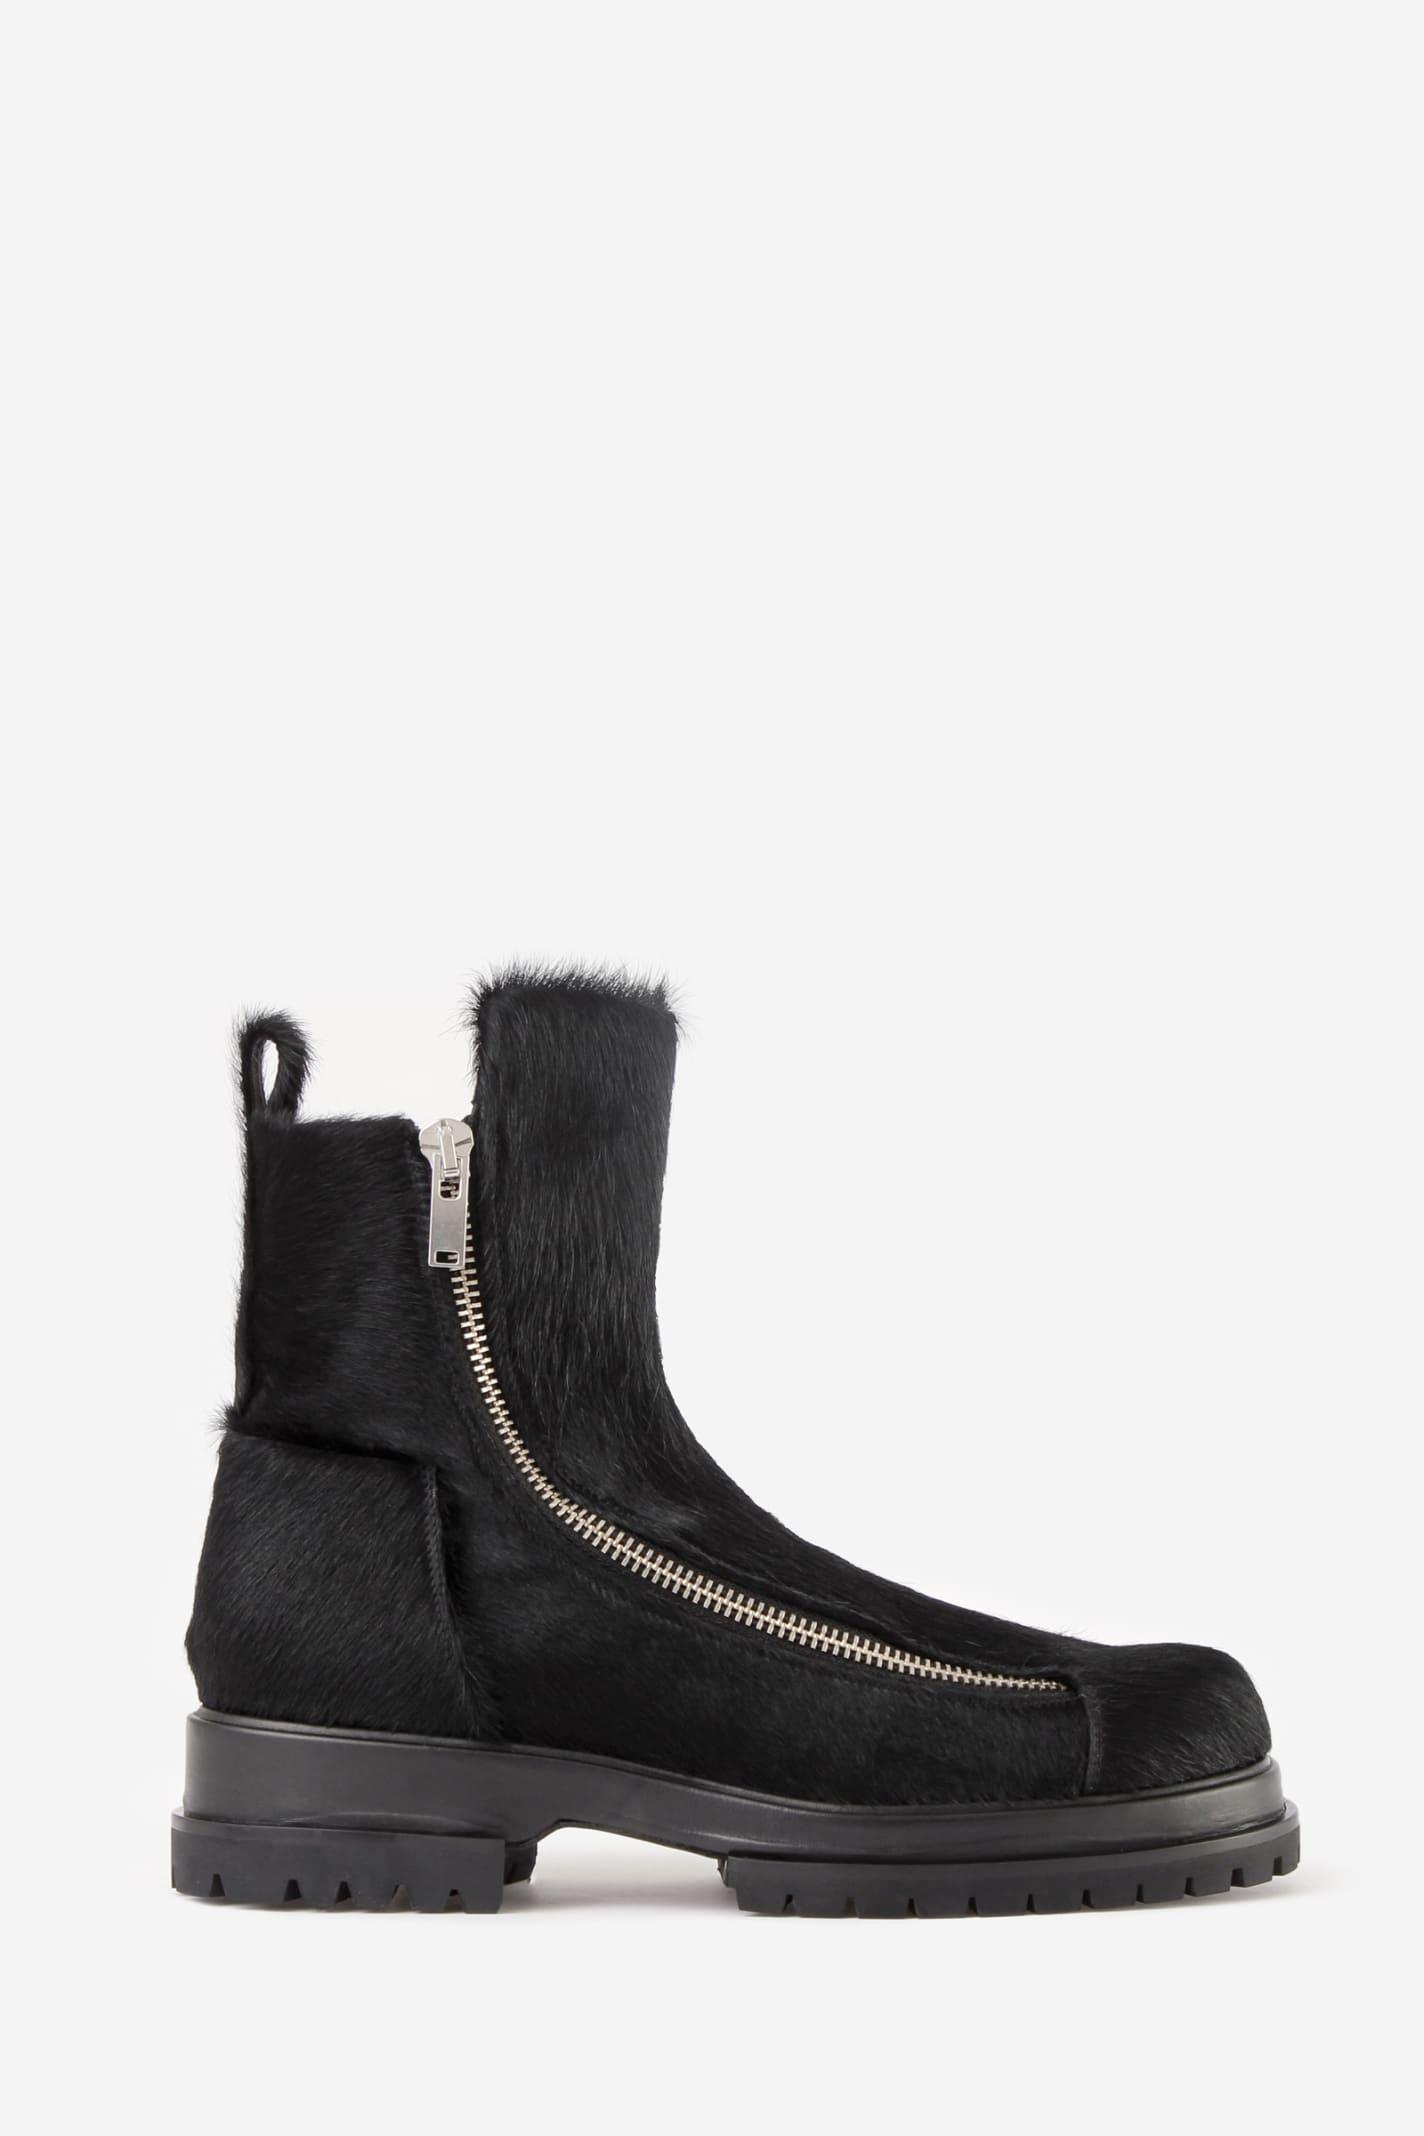 MAISON MINED】MARTINE CHELSEA BOOTS